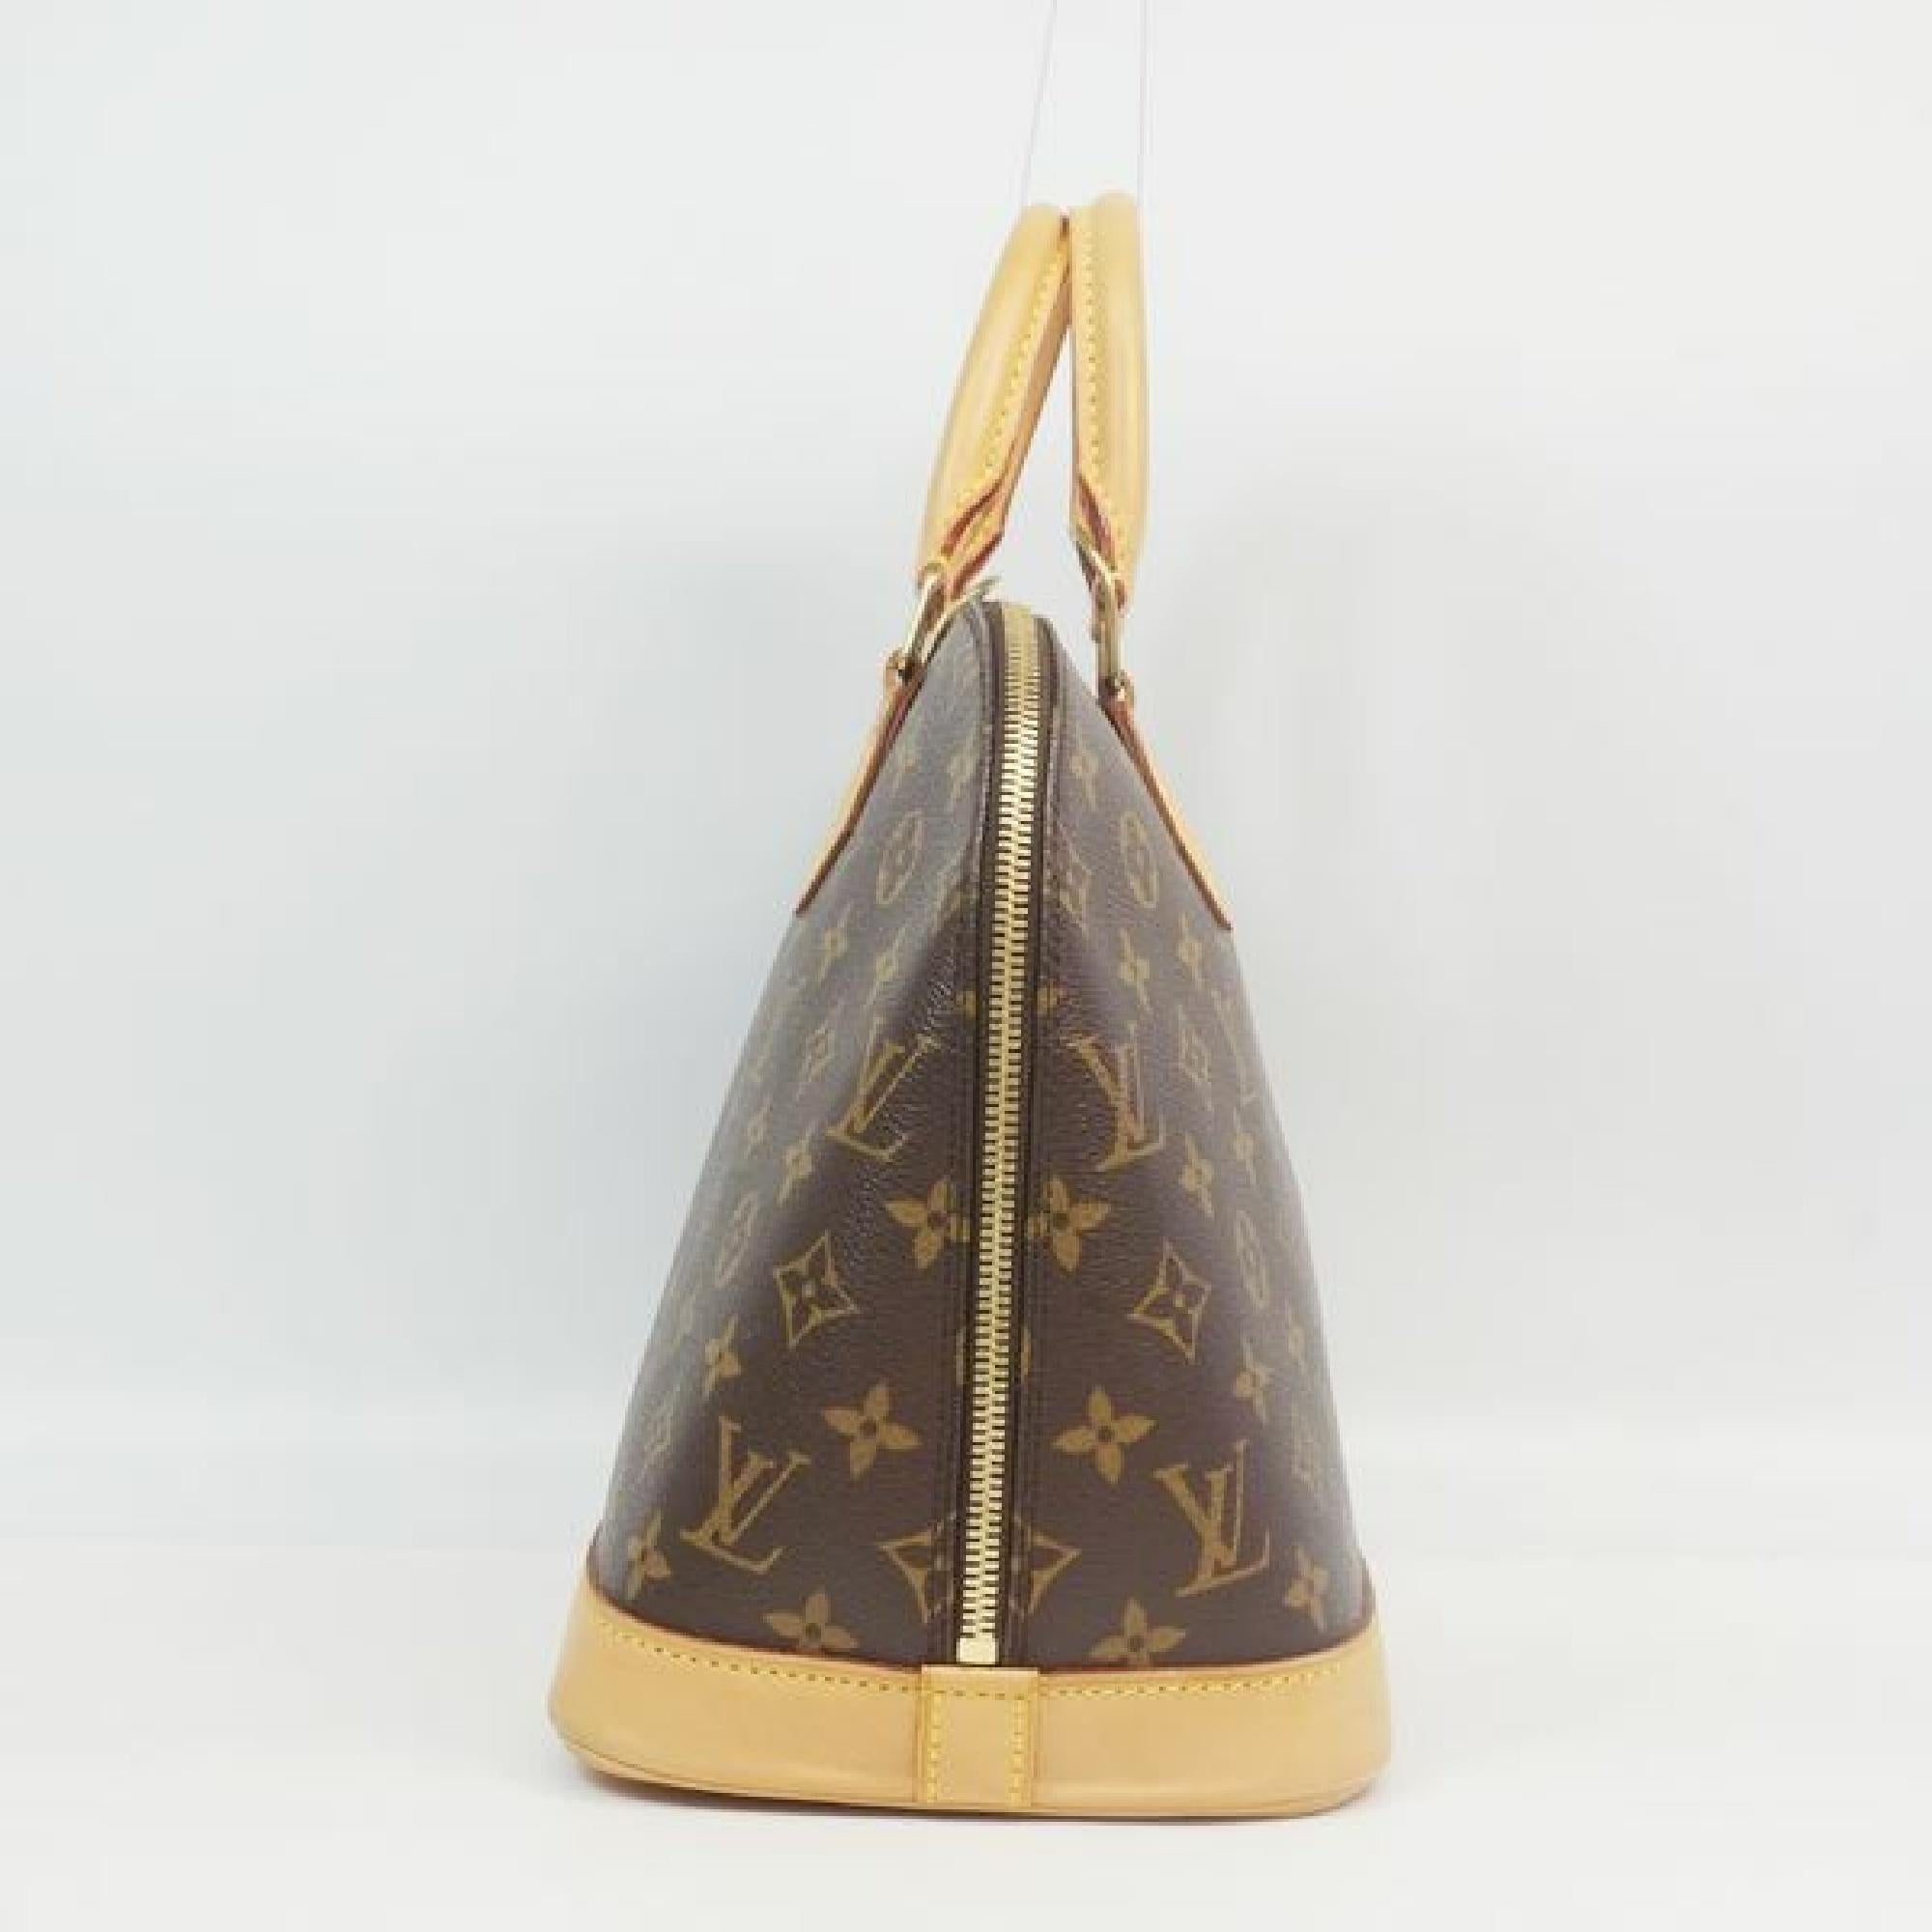 An authentic LOUIS VUITTON alma Womens handbag M51130 The outside material is Monogram canvas. The pattern is alma. This item is Contemporary. The year of manufacture would be 2003.
Rank
AB signs of wear (Small)
Used goods in good condition with